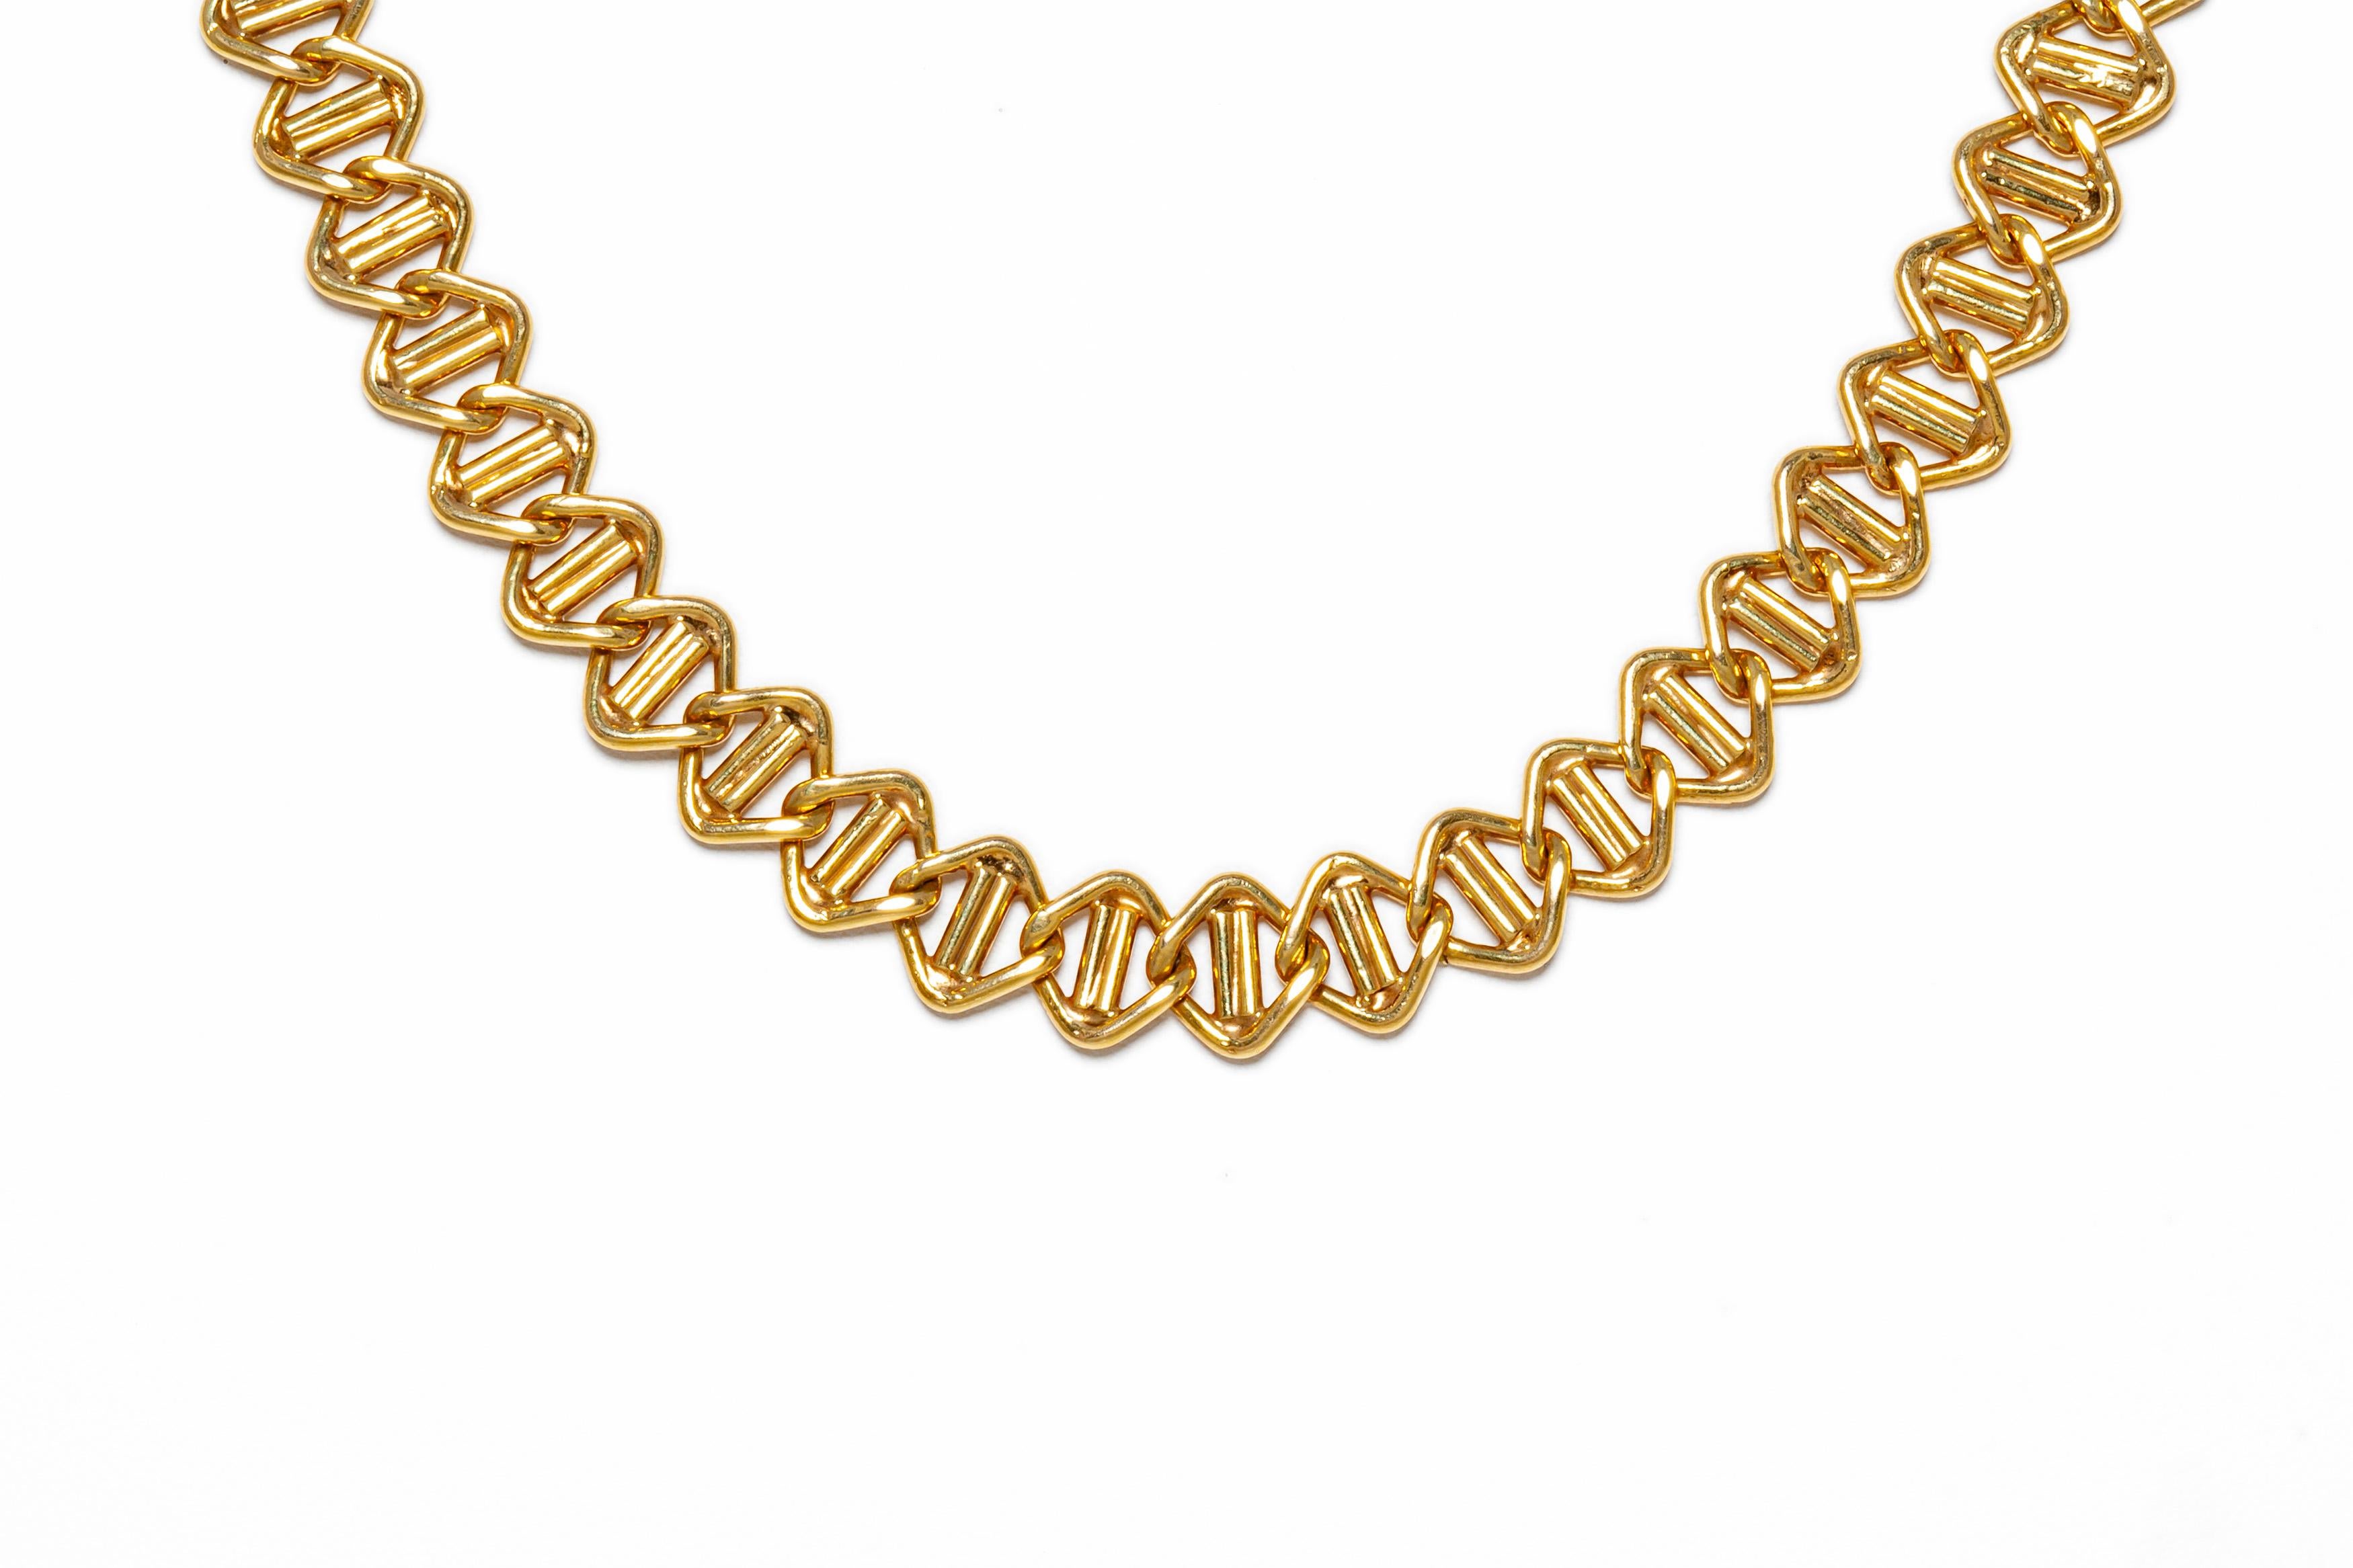 Chain, finely crafted in 14k yellow gold weighing 40.3 dwt/62.7 grams. The length of open chain is 30inch/75cm. Circa 1980s.